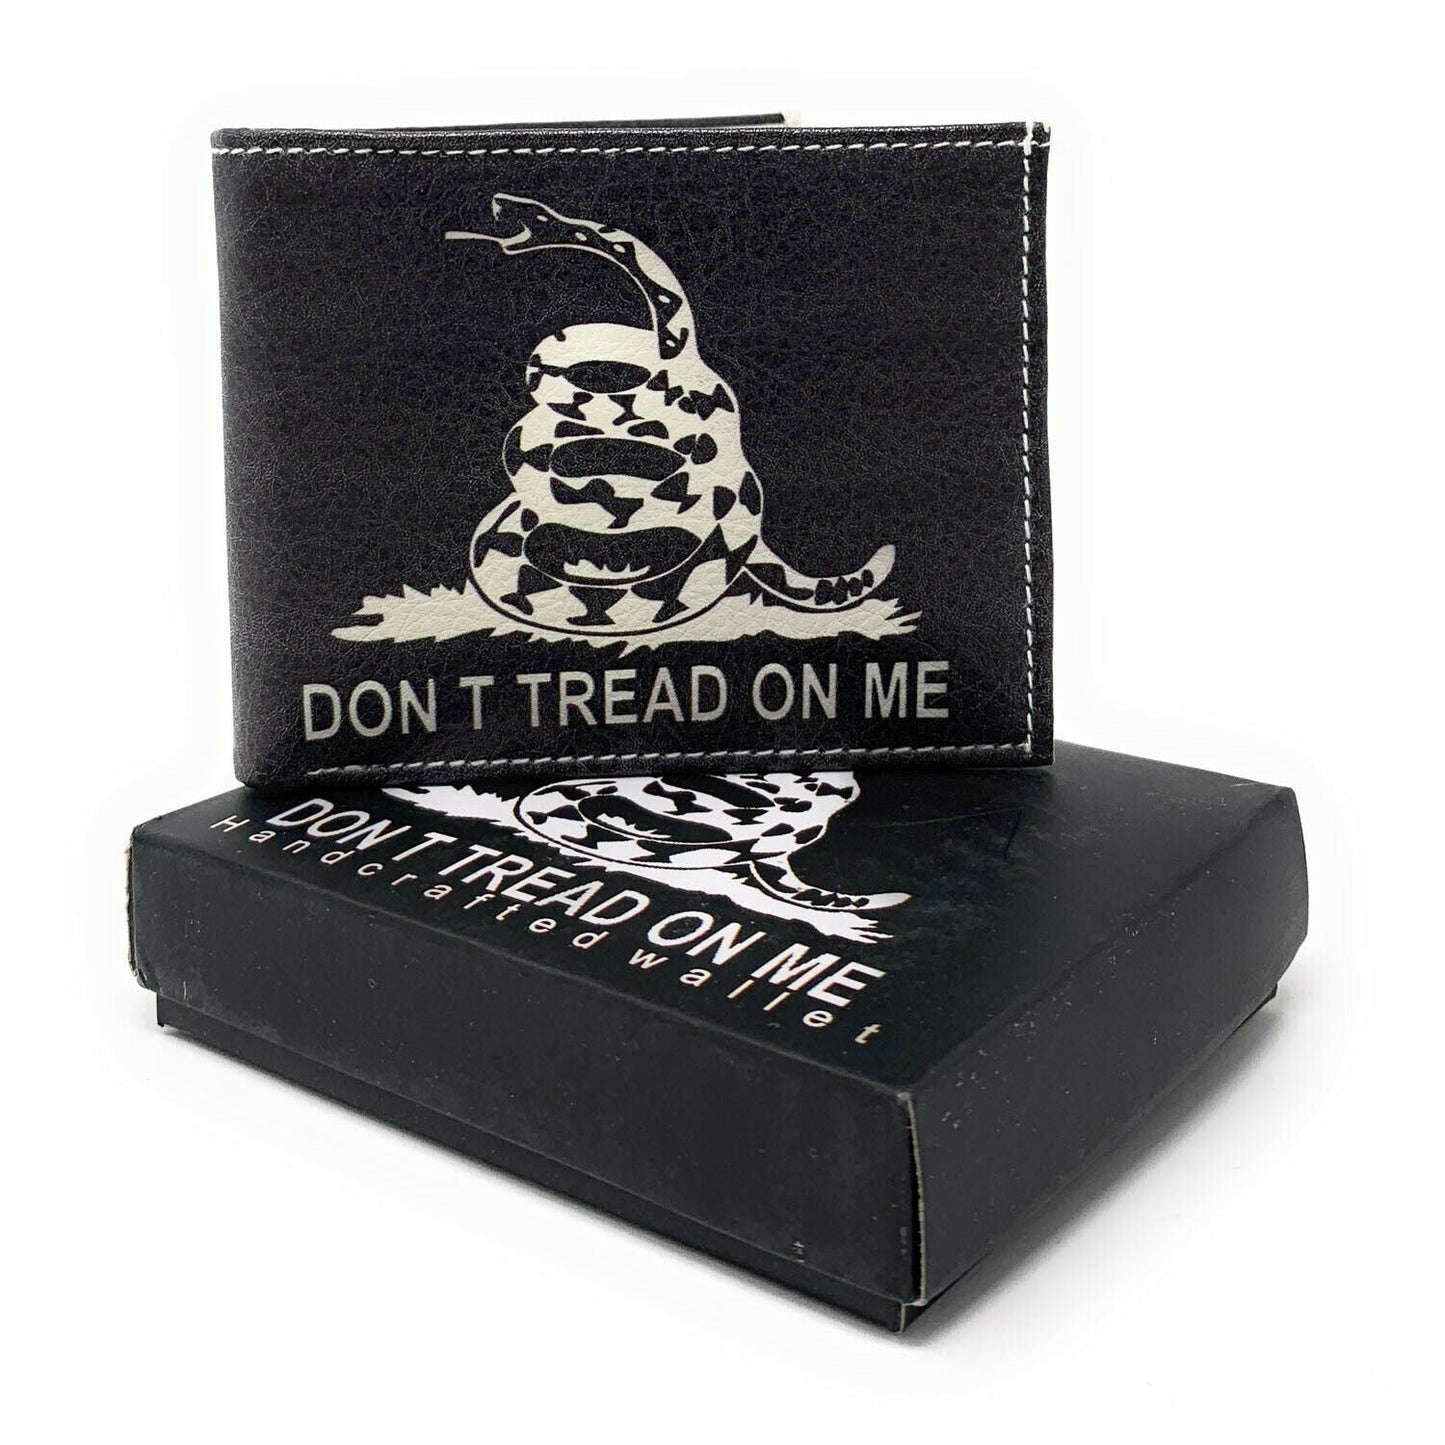 USA Patriotic Bifold Wallets In Gift Box Mens Womens Youth-UNCATEGORIZED-Empire Cove-LIM-VL529-DON'T_TREAD_ON_ME_SNAKES-Casaba Shop